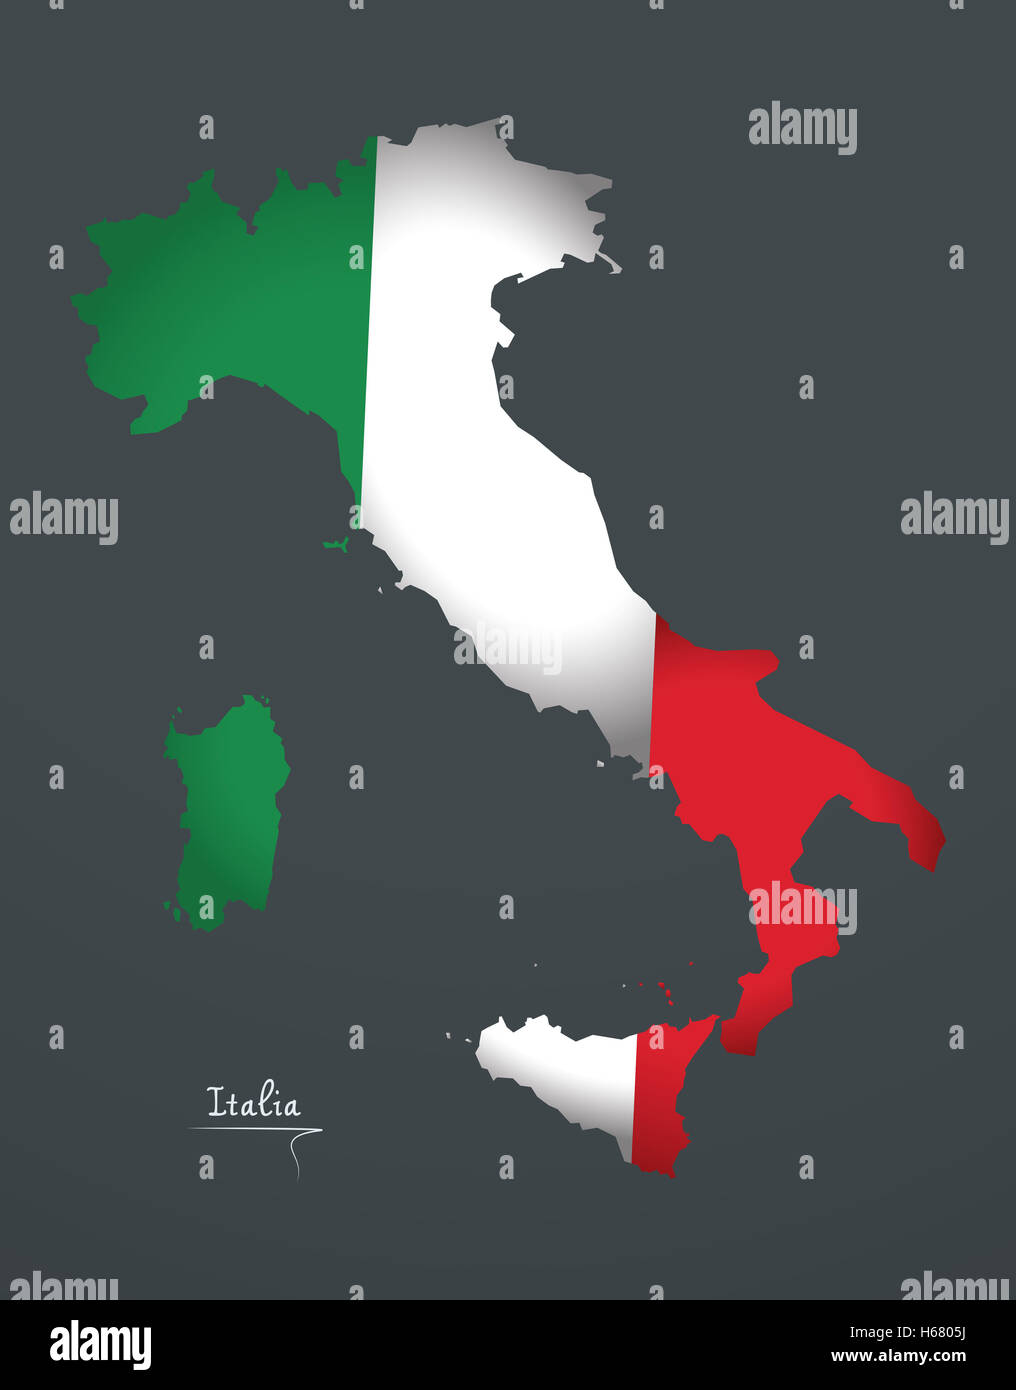 Italy map special artwork style with flag illustration Stock Photo